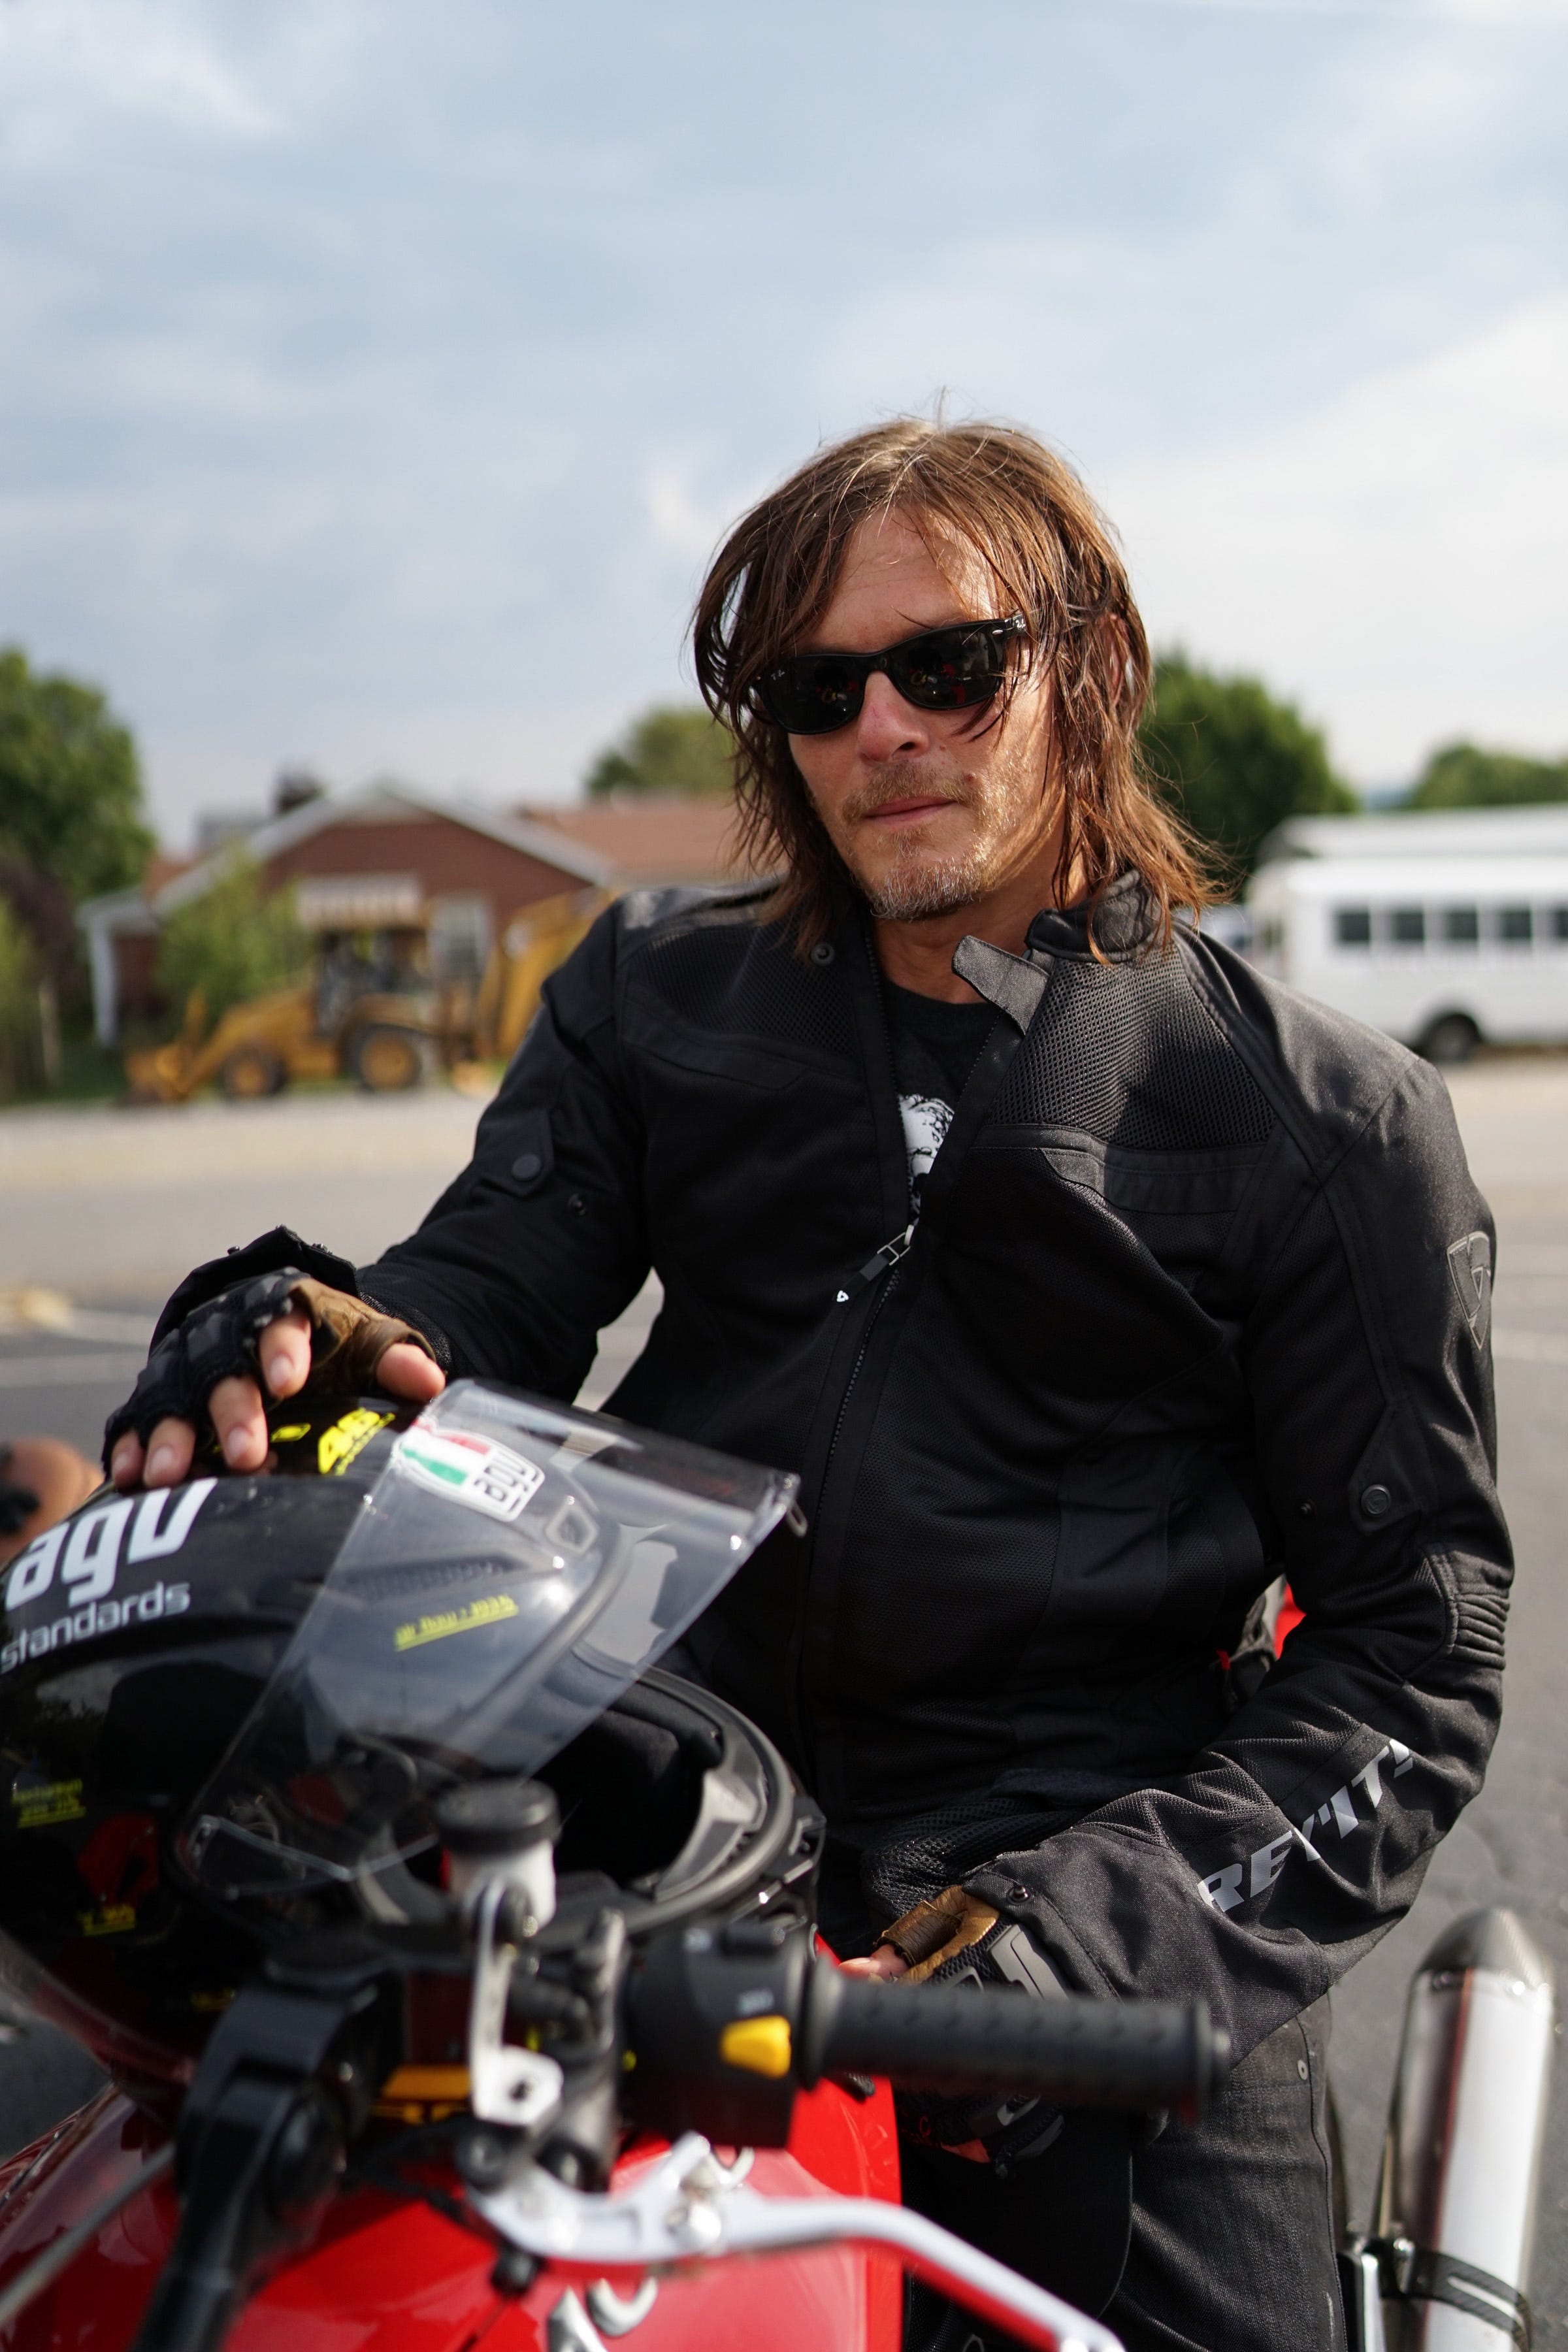 Take 'Walking Dead' break to 'Ride with Norman Reedus' | whas11.com